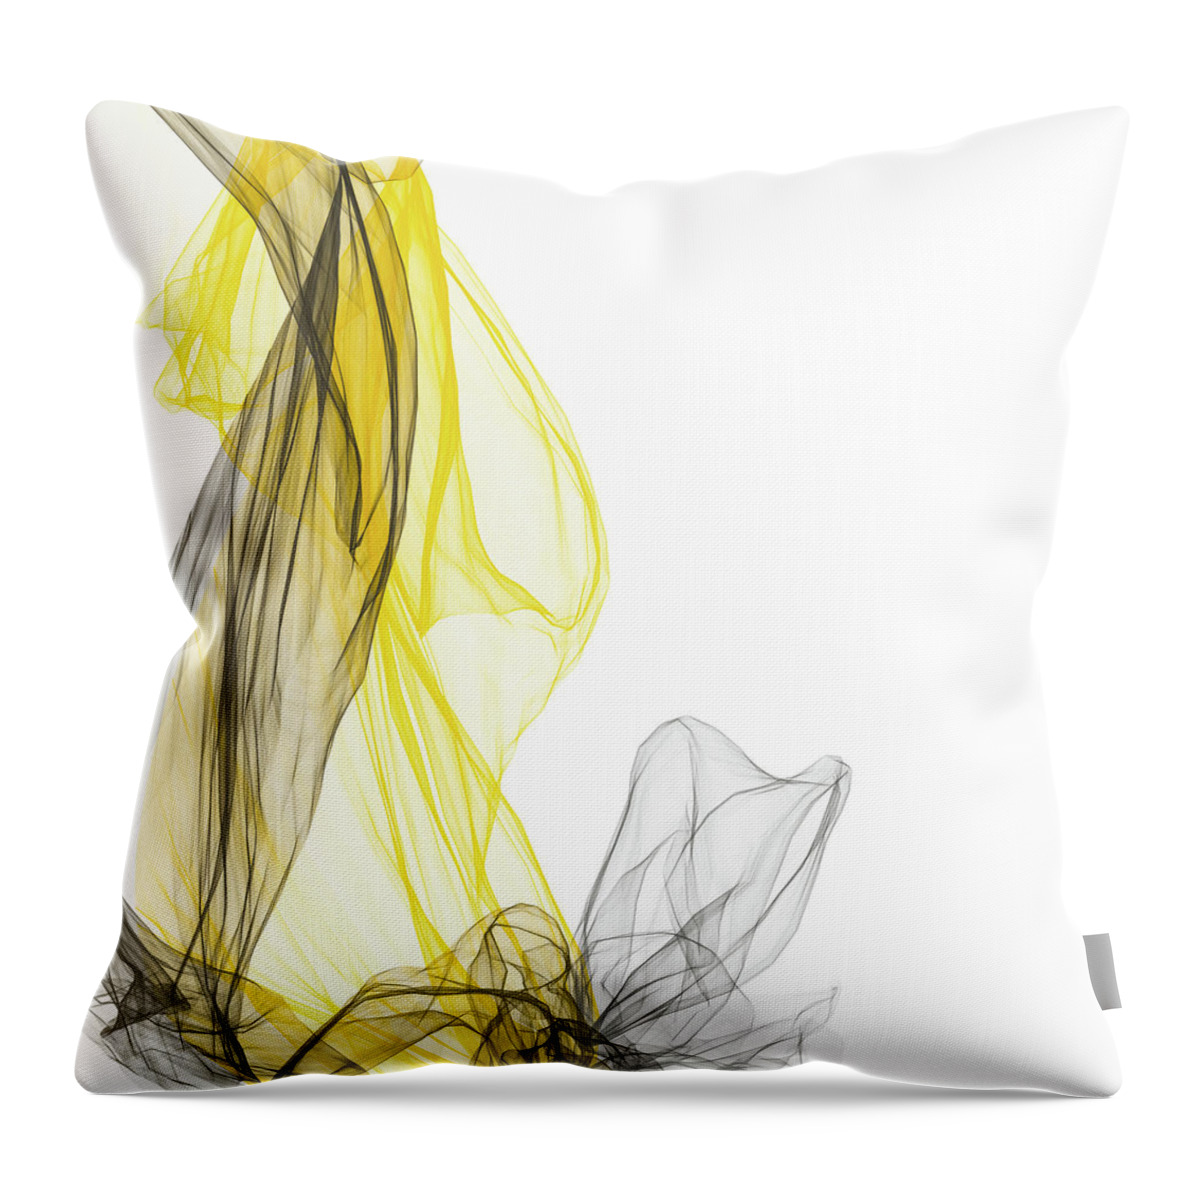 Yellow Throw Pillow featuring the painting Descent - Yellow And Gray Abstract Modern Art by Lourry Legarde